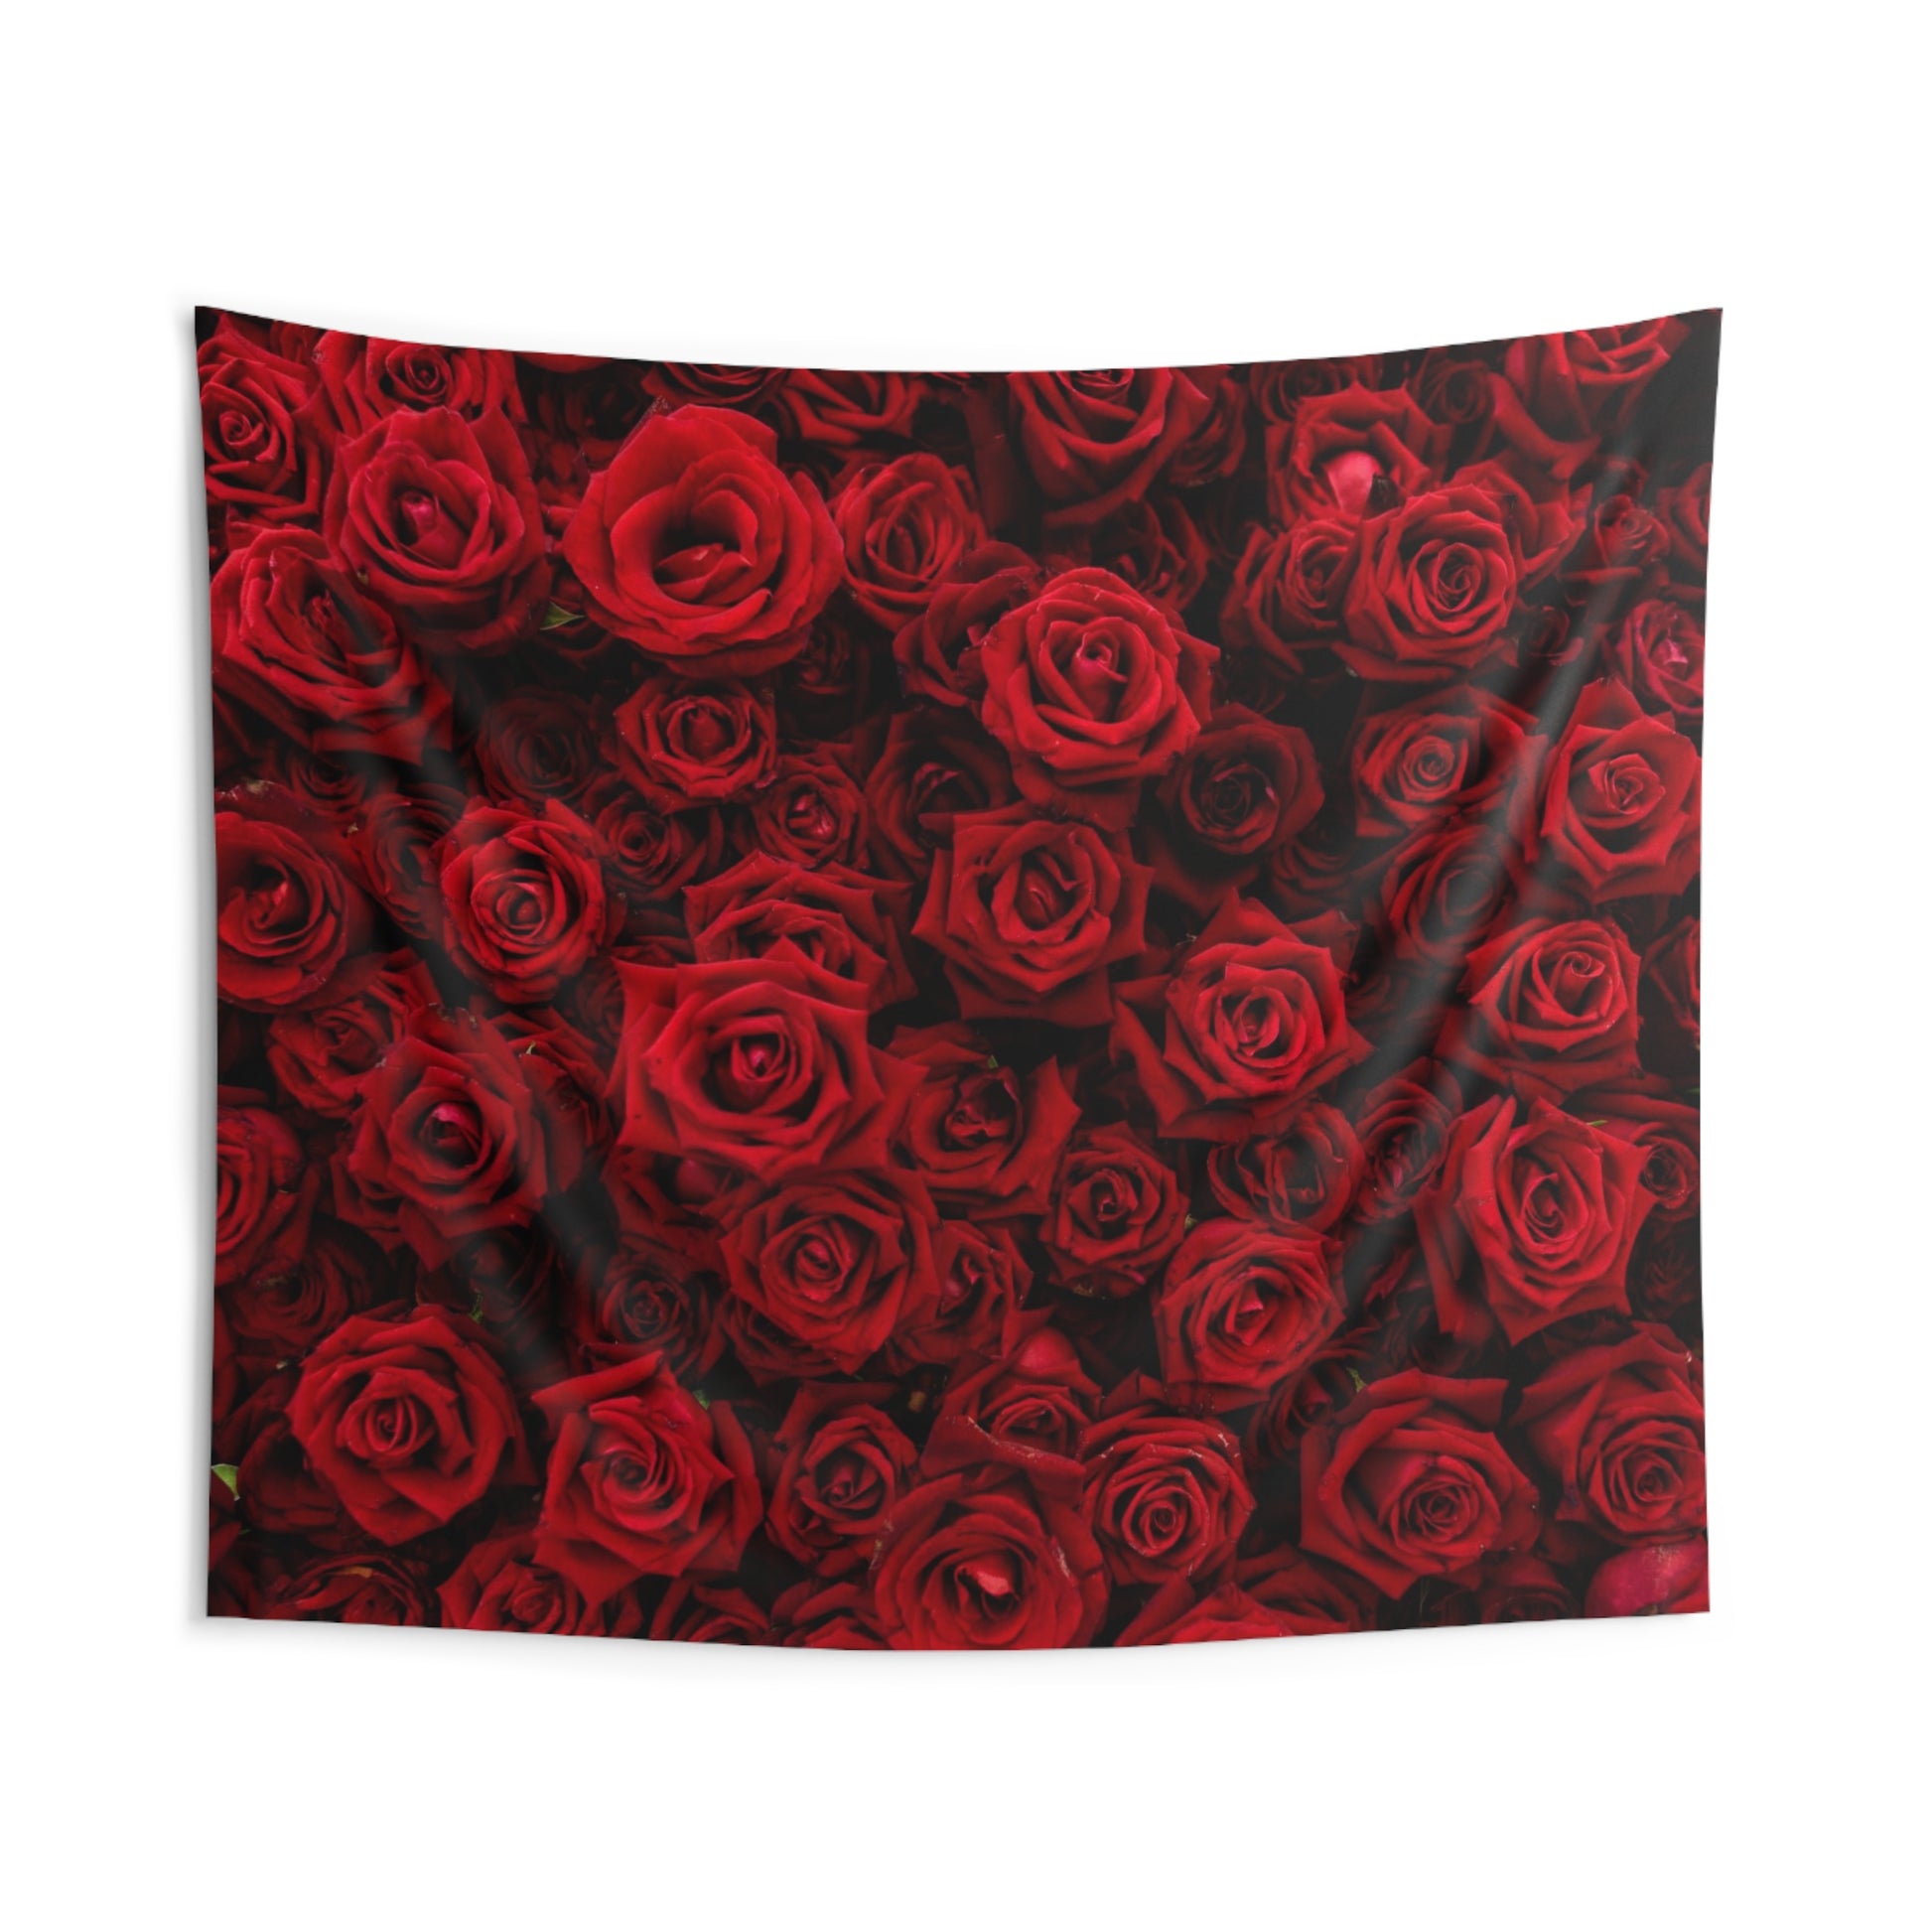 Red Roses Wall Tapestry, Floral Flowers Romantic Bridal Landscape Wall Hanging Large Small Decor Home Dorm Room Aesthetic Backdrop Starcove Fashion